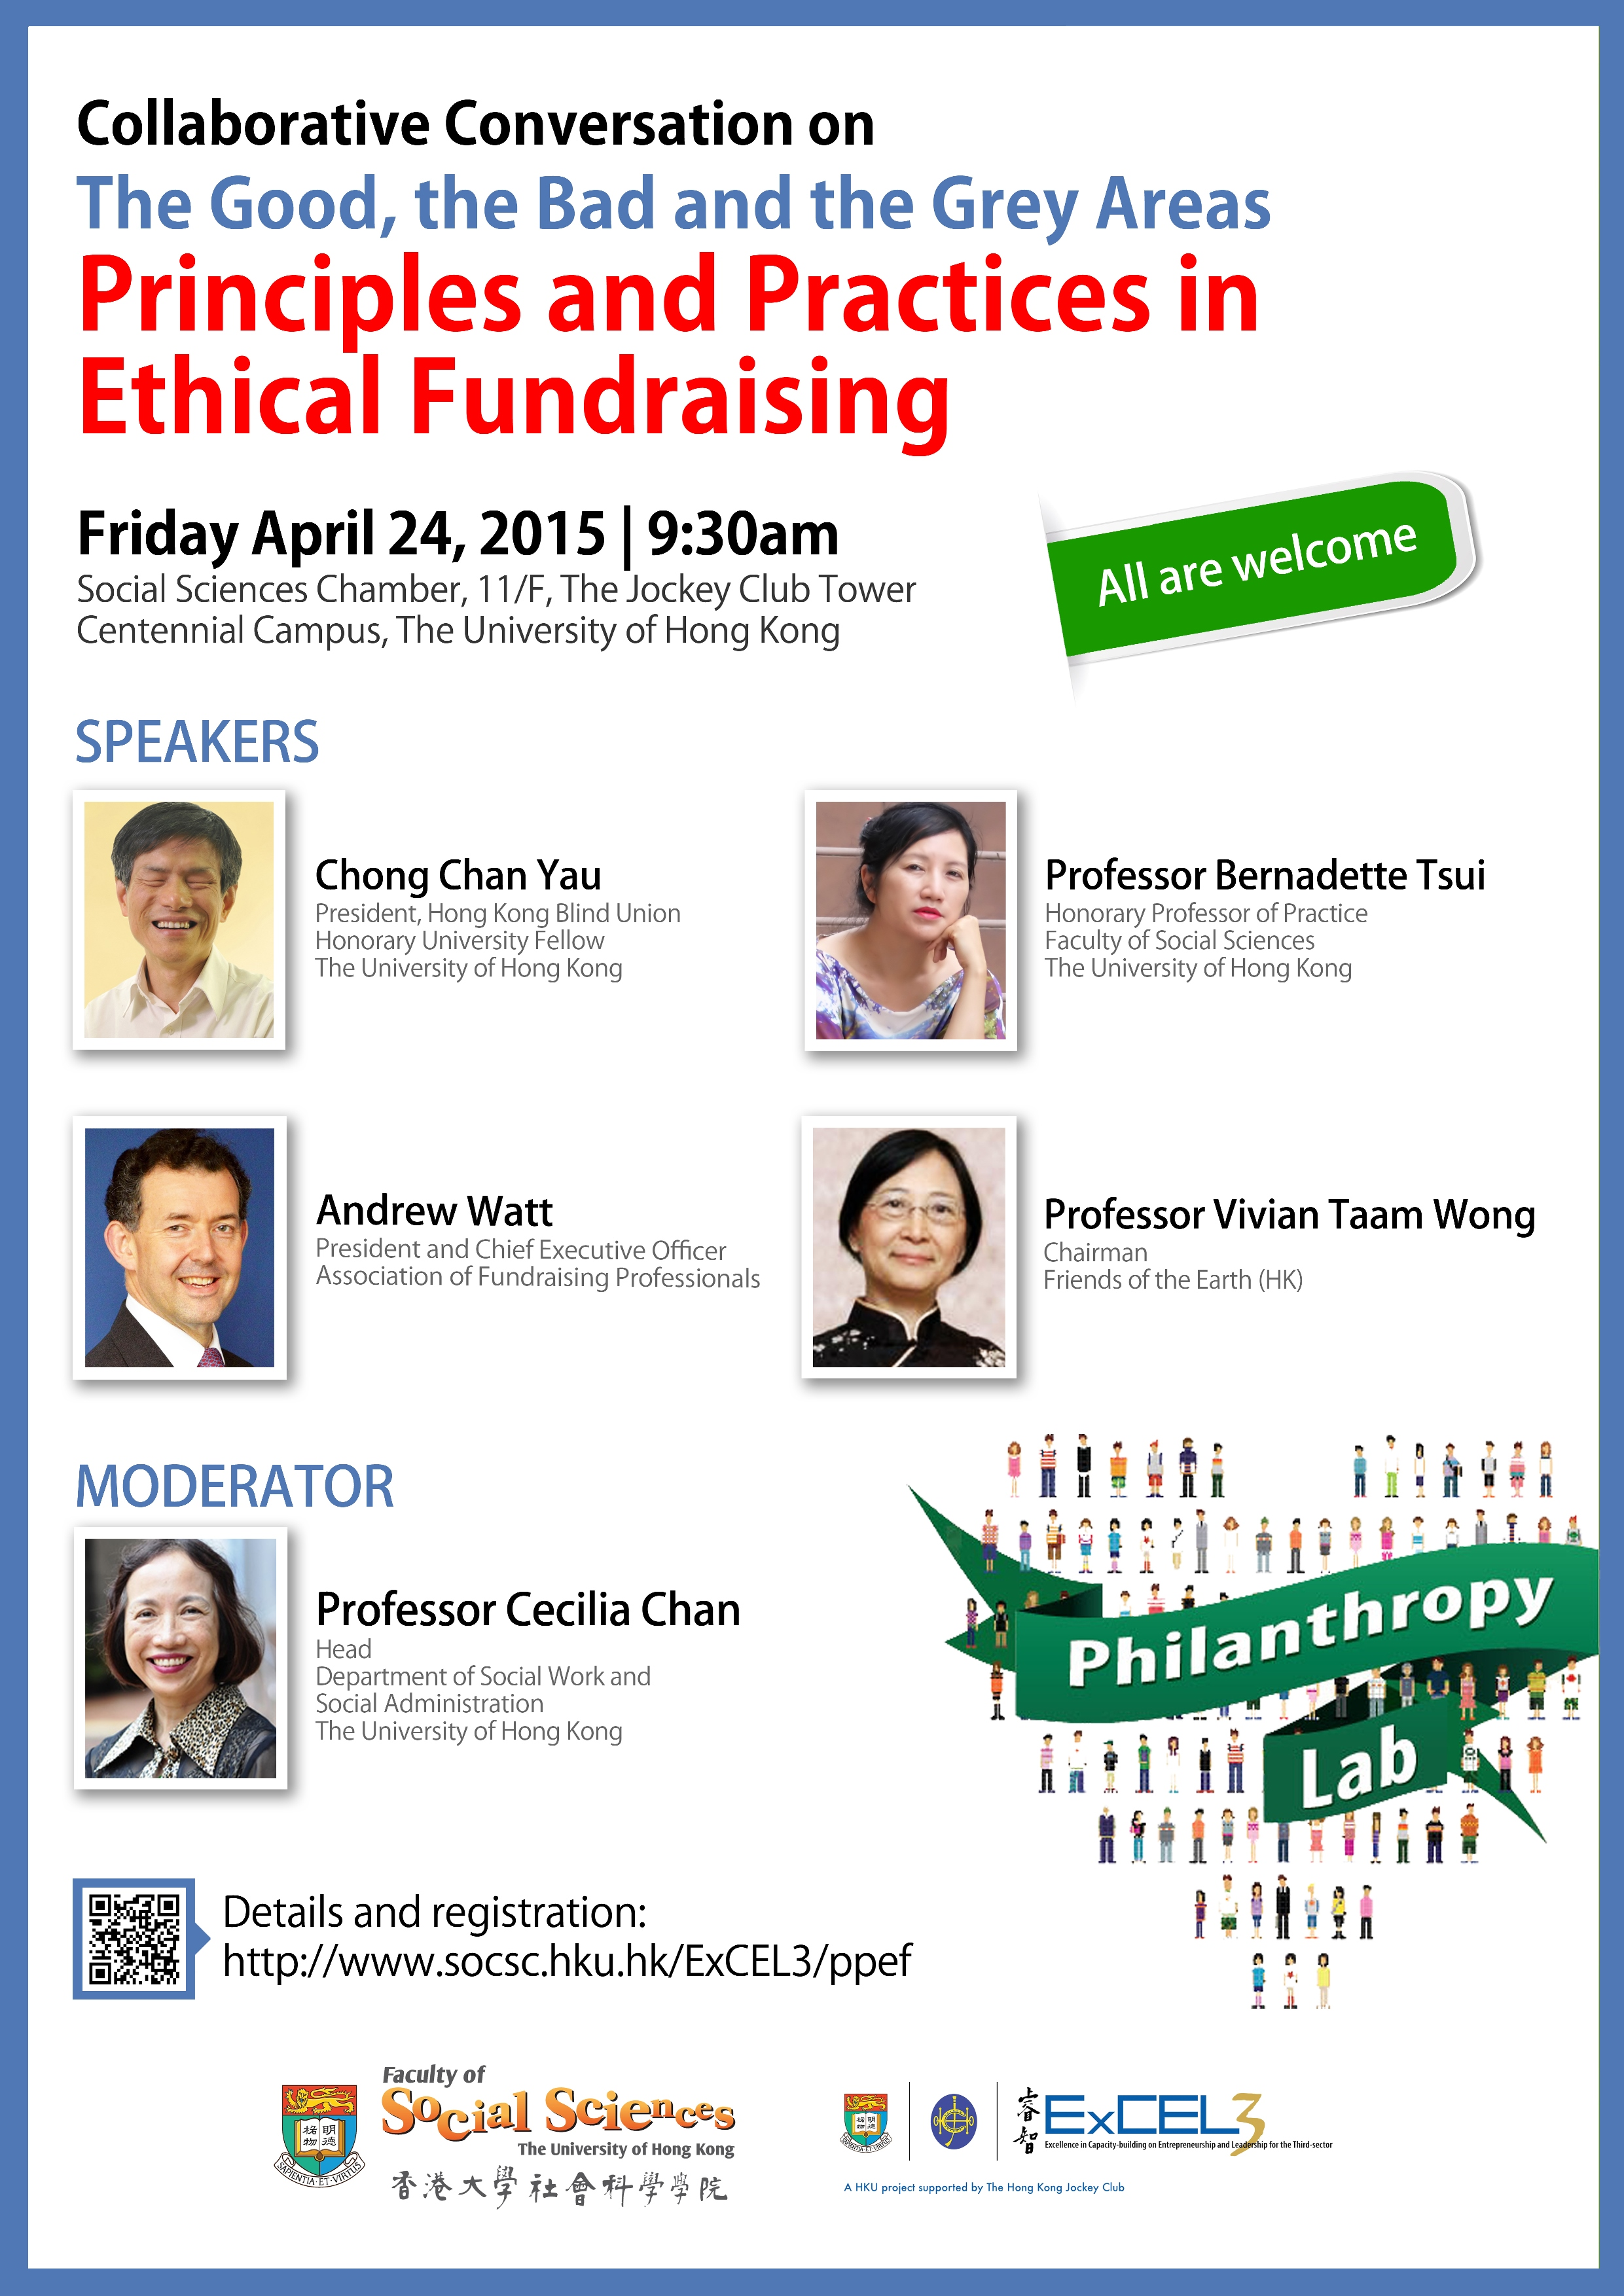 Collaborative Conversation on the Good, the Bad and the Grey Areas: Principles and Practices in Ethical Fundraising